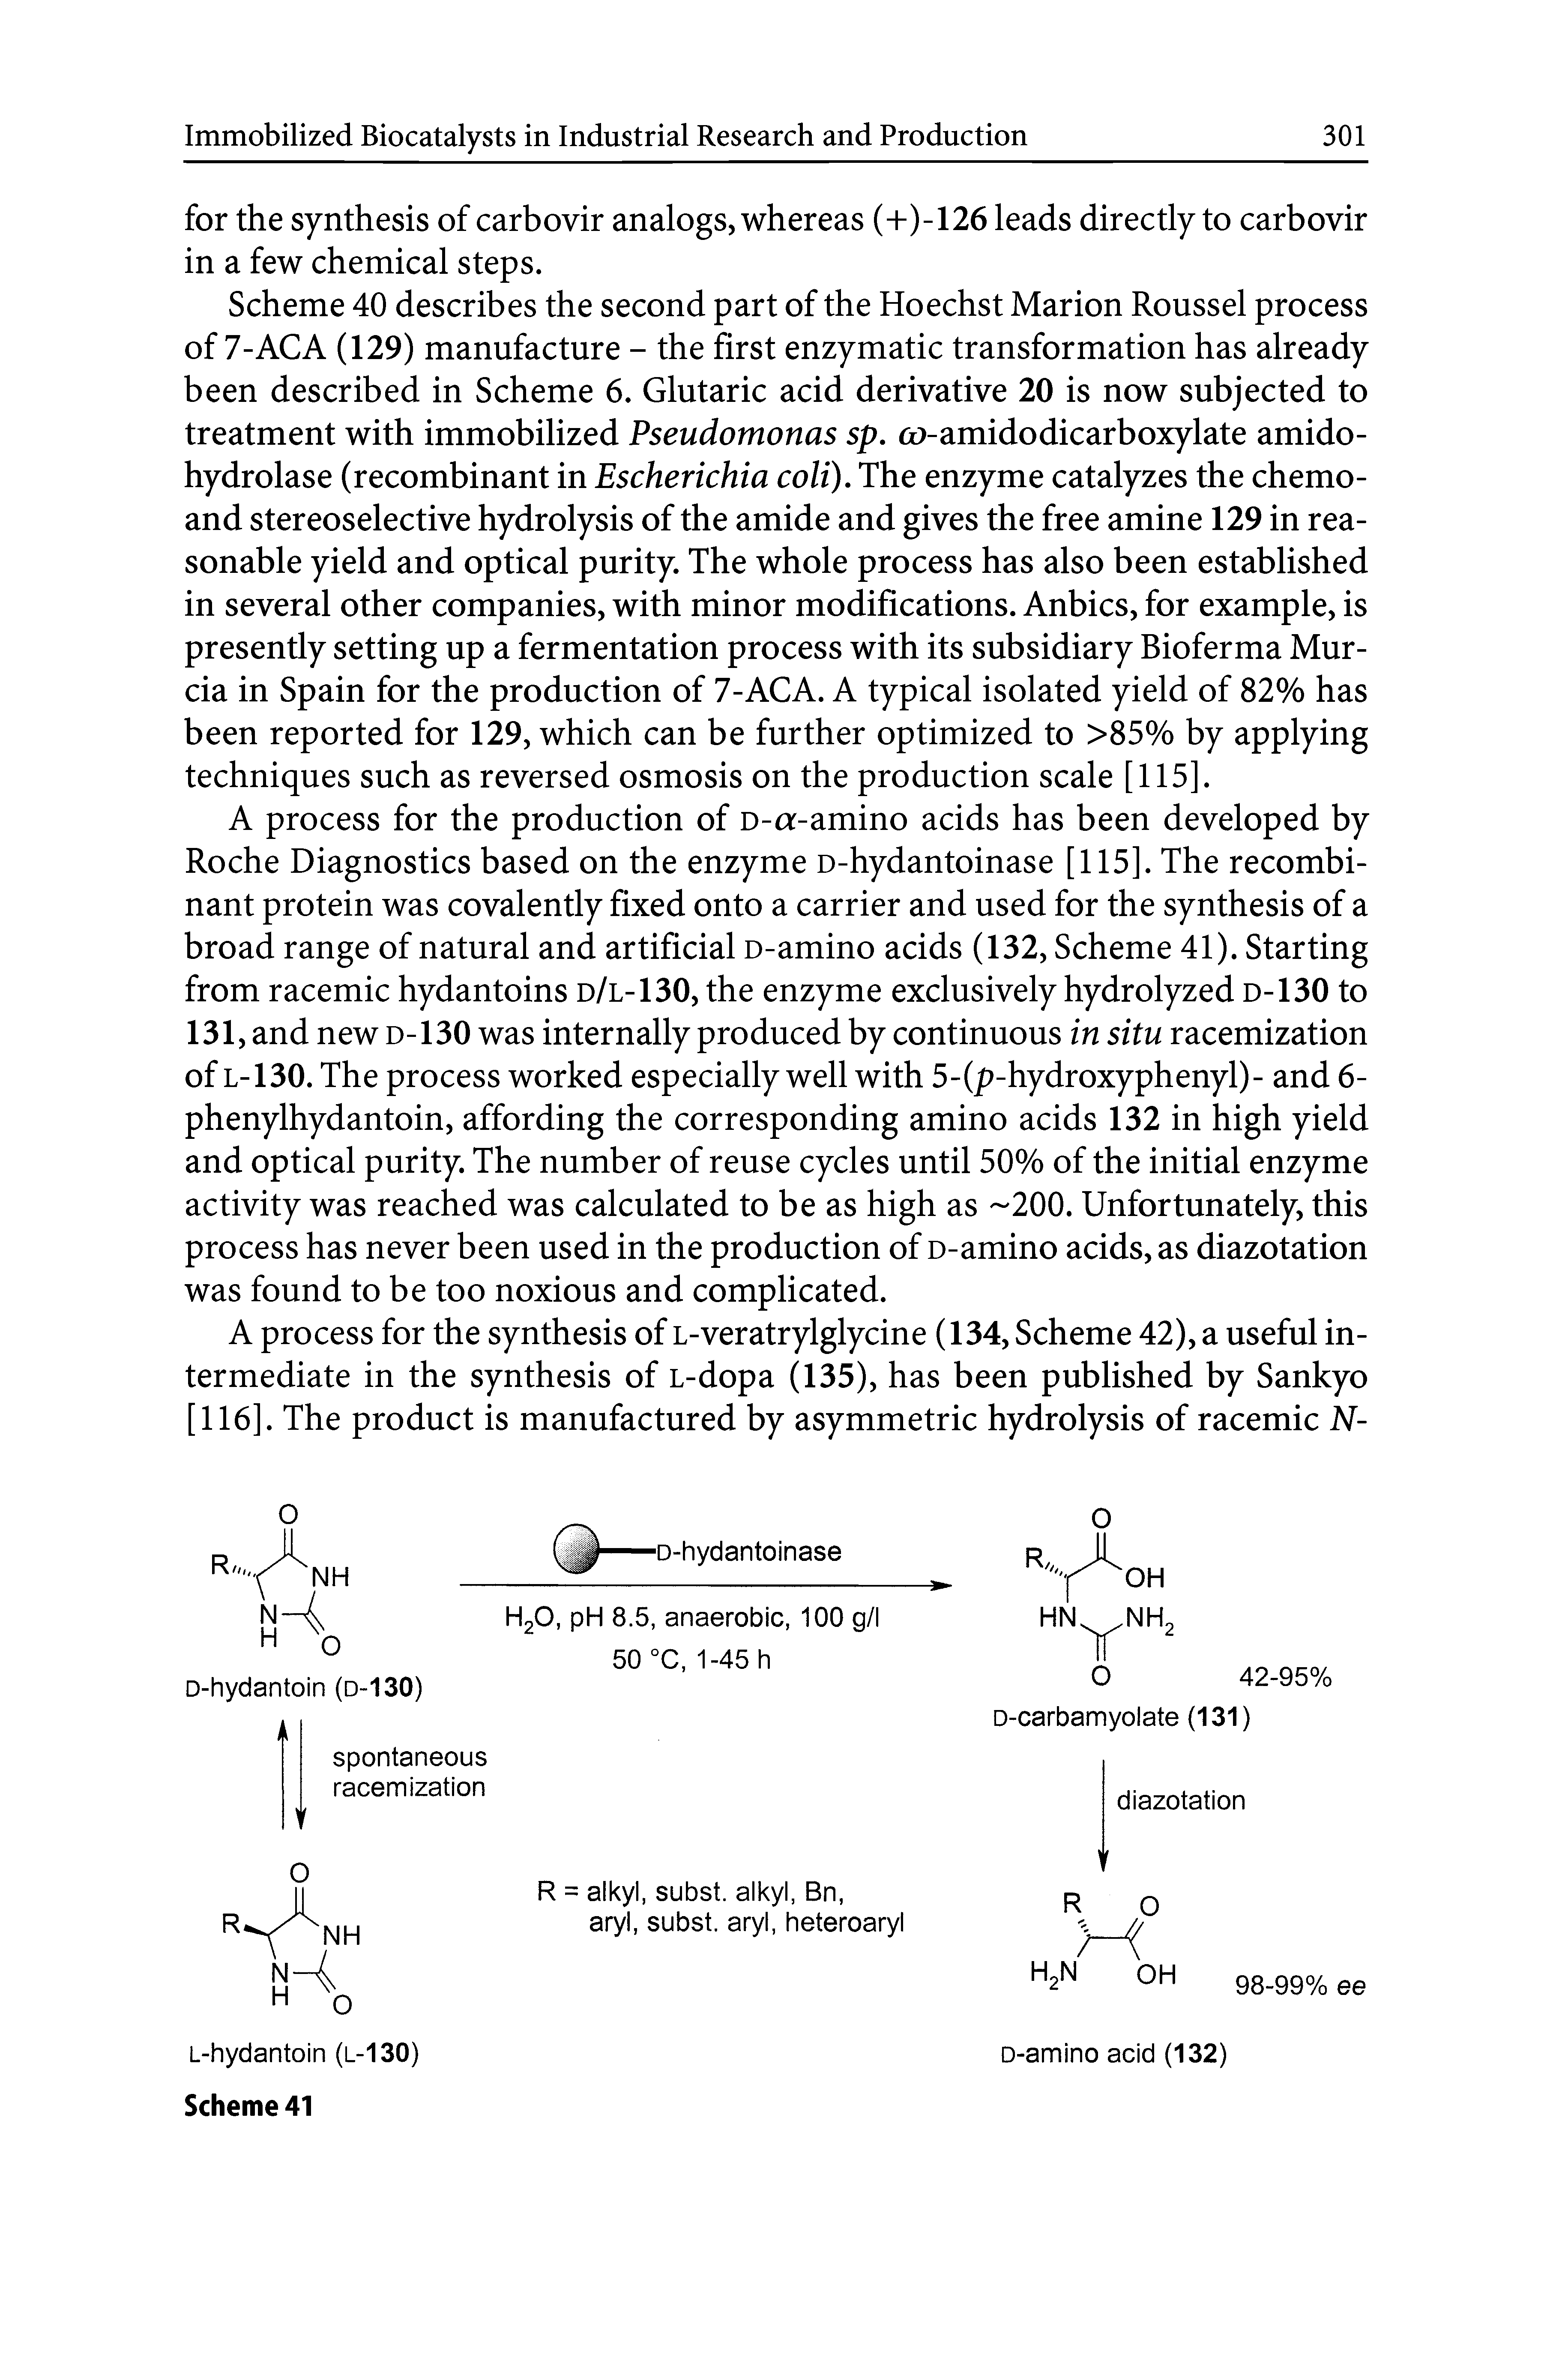 Scheme 40 describes the second part of the Hoechst Marion Roussel process of 7-AC A (129) manufacture - the first enzymatic transformation has already been described in Scheme 6. Glutaric acid derivative 20 is now subjected to treatment with immobilized Pseudomonas sp, cu-amidodicarboxylate amido-hydrolase (recombinant in Escherichia coli). The enzyme catalyzes the chemo-and stereoselective hydrolysis of the amide and gives the free amine 129 in reasonable yield and optical purity. The whole process has also been established in several other companies, with minor modifications. Anbics, for example, is presently setting up a fermentation process with its subsidiary Bioferma Murcia in Spain for the production of 7-AC A. A typical isolated yield of 82% has been reported for 129, which can be further optimized to >85% by applying techniques such as reversed osmosis on the production scale [115].